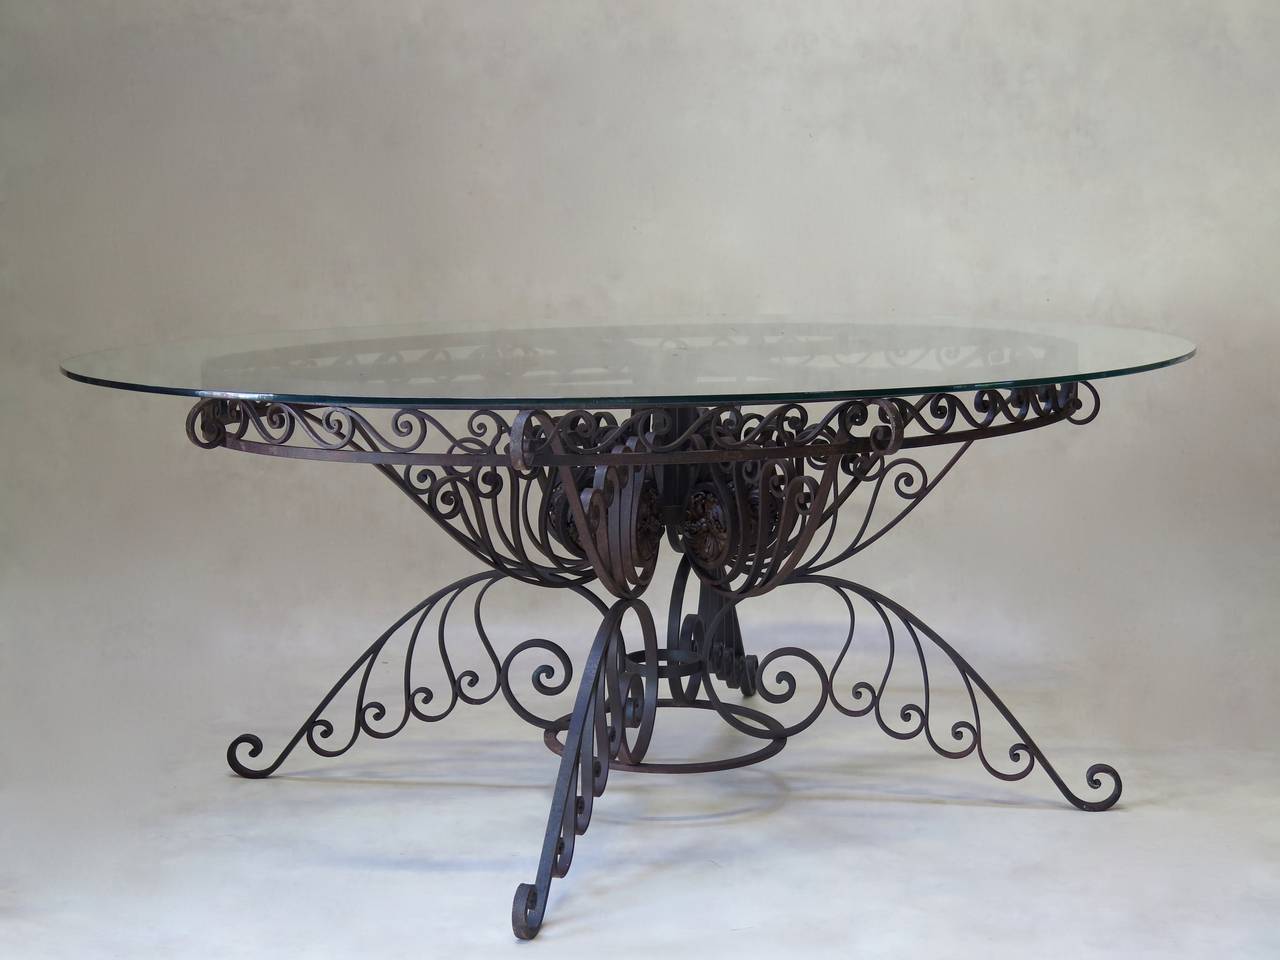 Stunning oval wrought iron dining table with an elaborately scrolled base, adorned with flower rosettes. Beautiful craftsmanship and design. Fitted with an oval glass top.